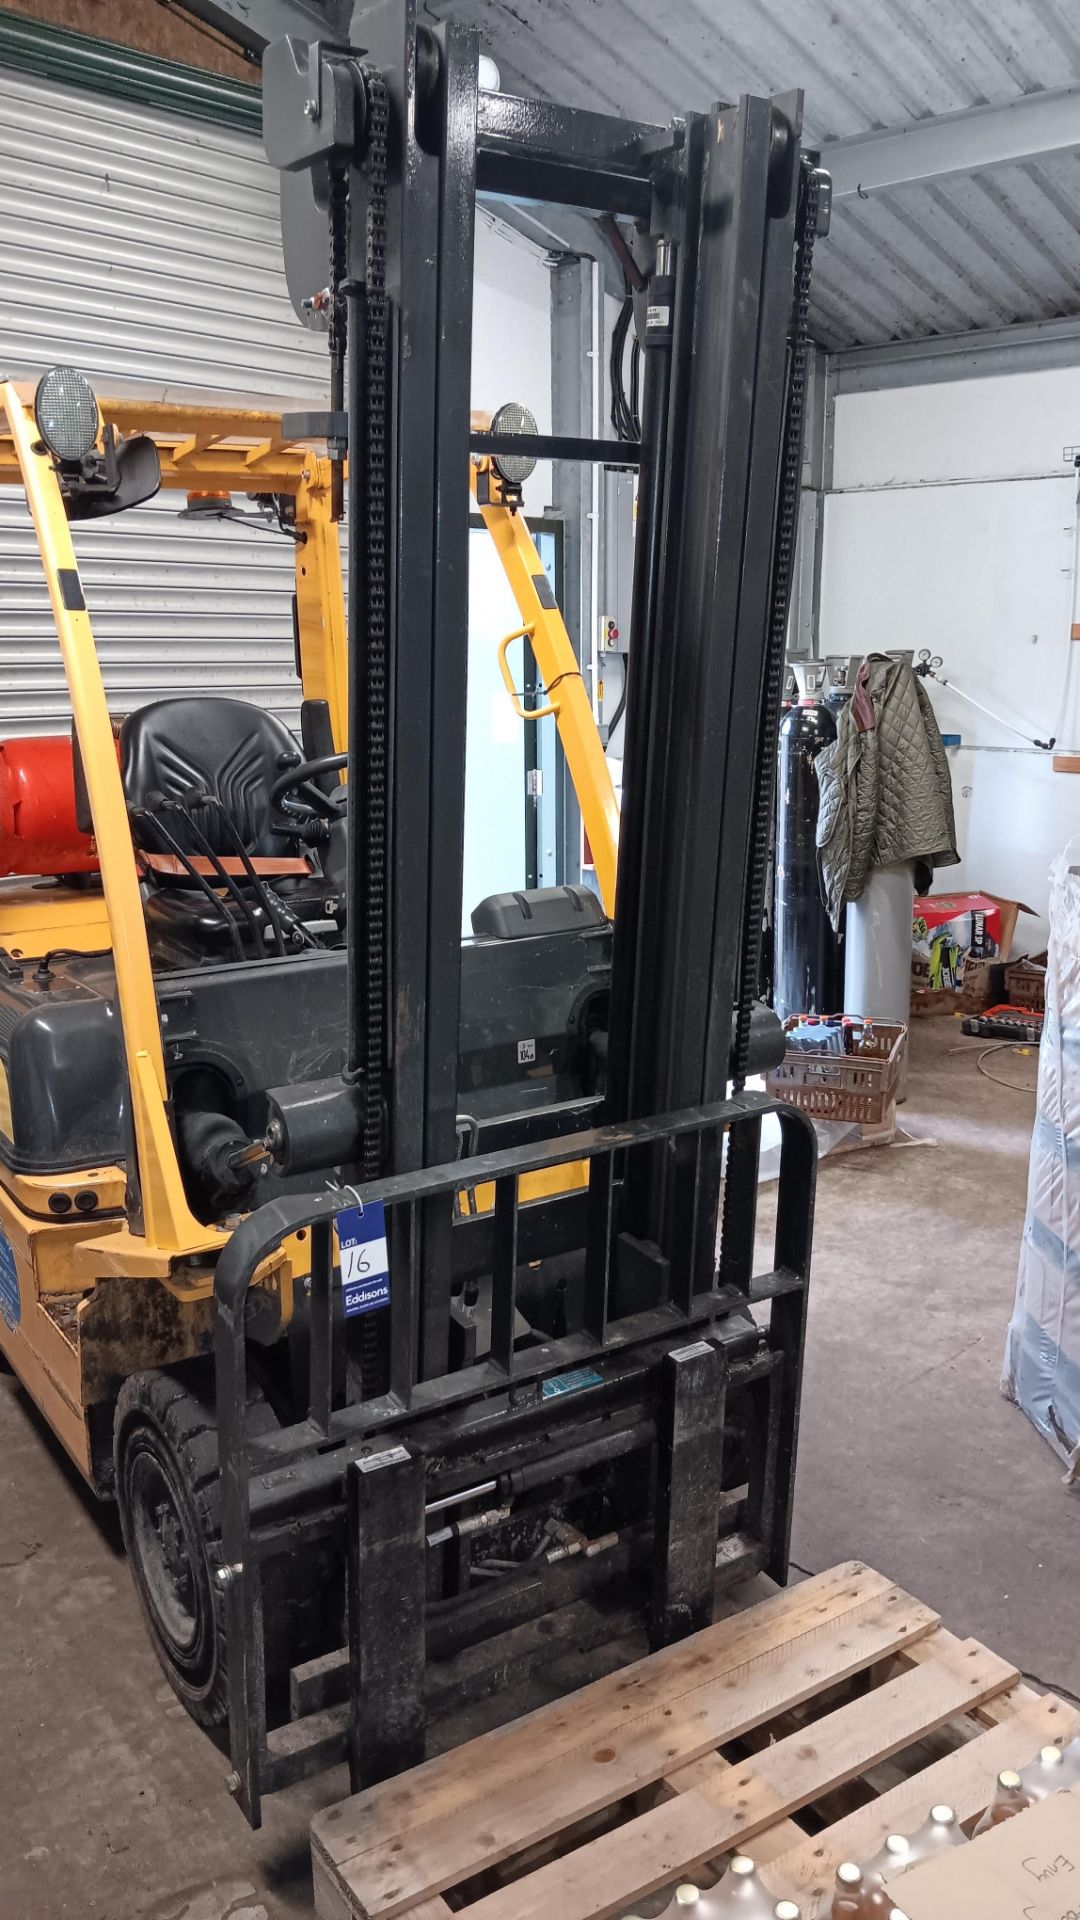 TCM 15 PID1A15LK 1.5ton SWL LPG forklift, serial number P1D1E704039 (2018) fitted side shift, 819 - Image 7 of 10